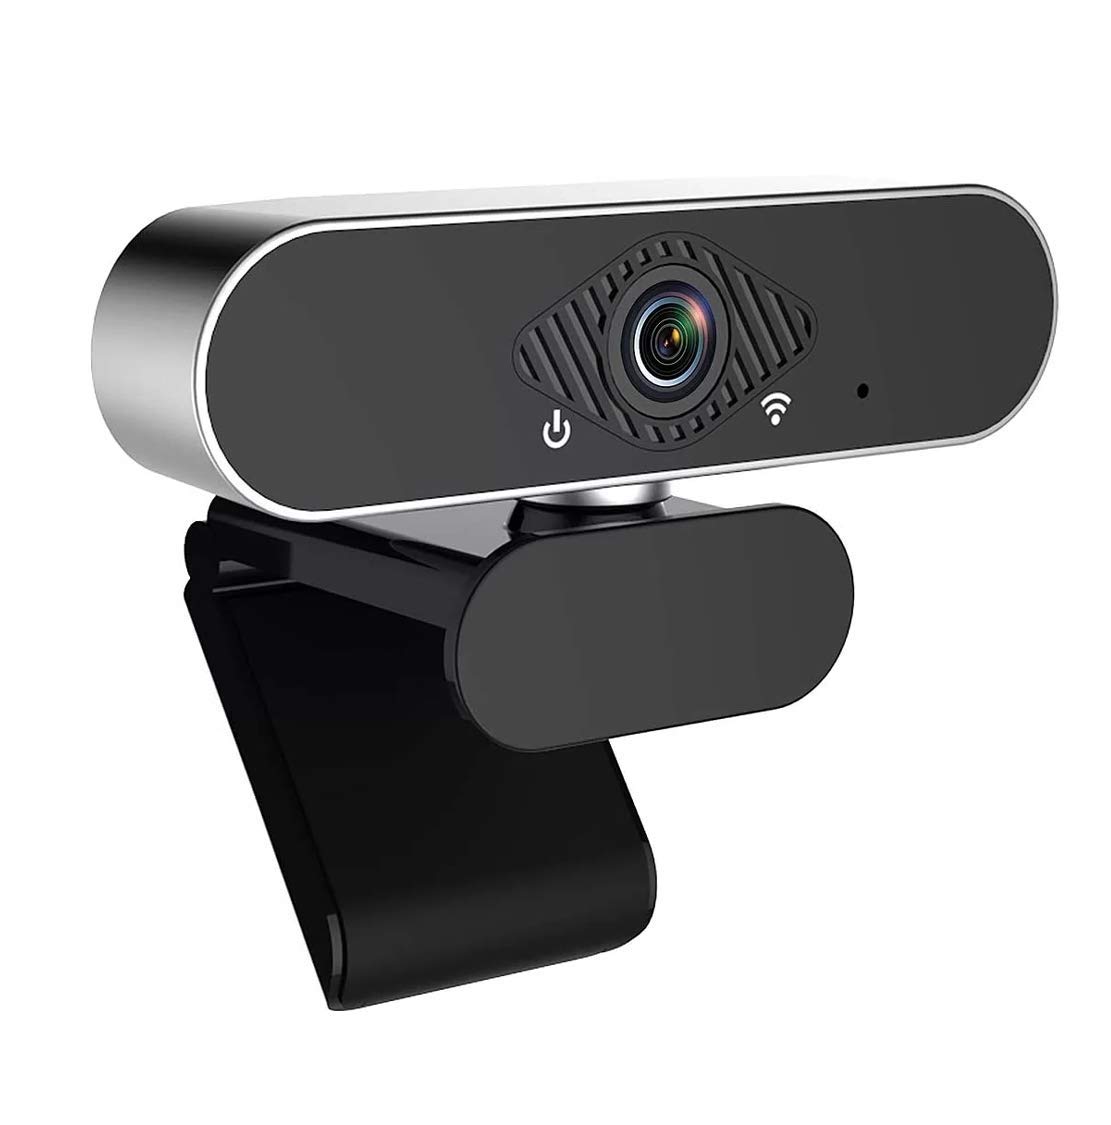 【Upgraded】 1080P Web Cam with Microphone Computer Web Camera HD USB Webcam for PC Desktop & Laptop Streaming Video Cam 